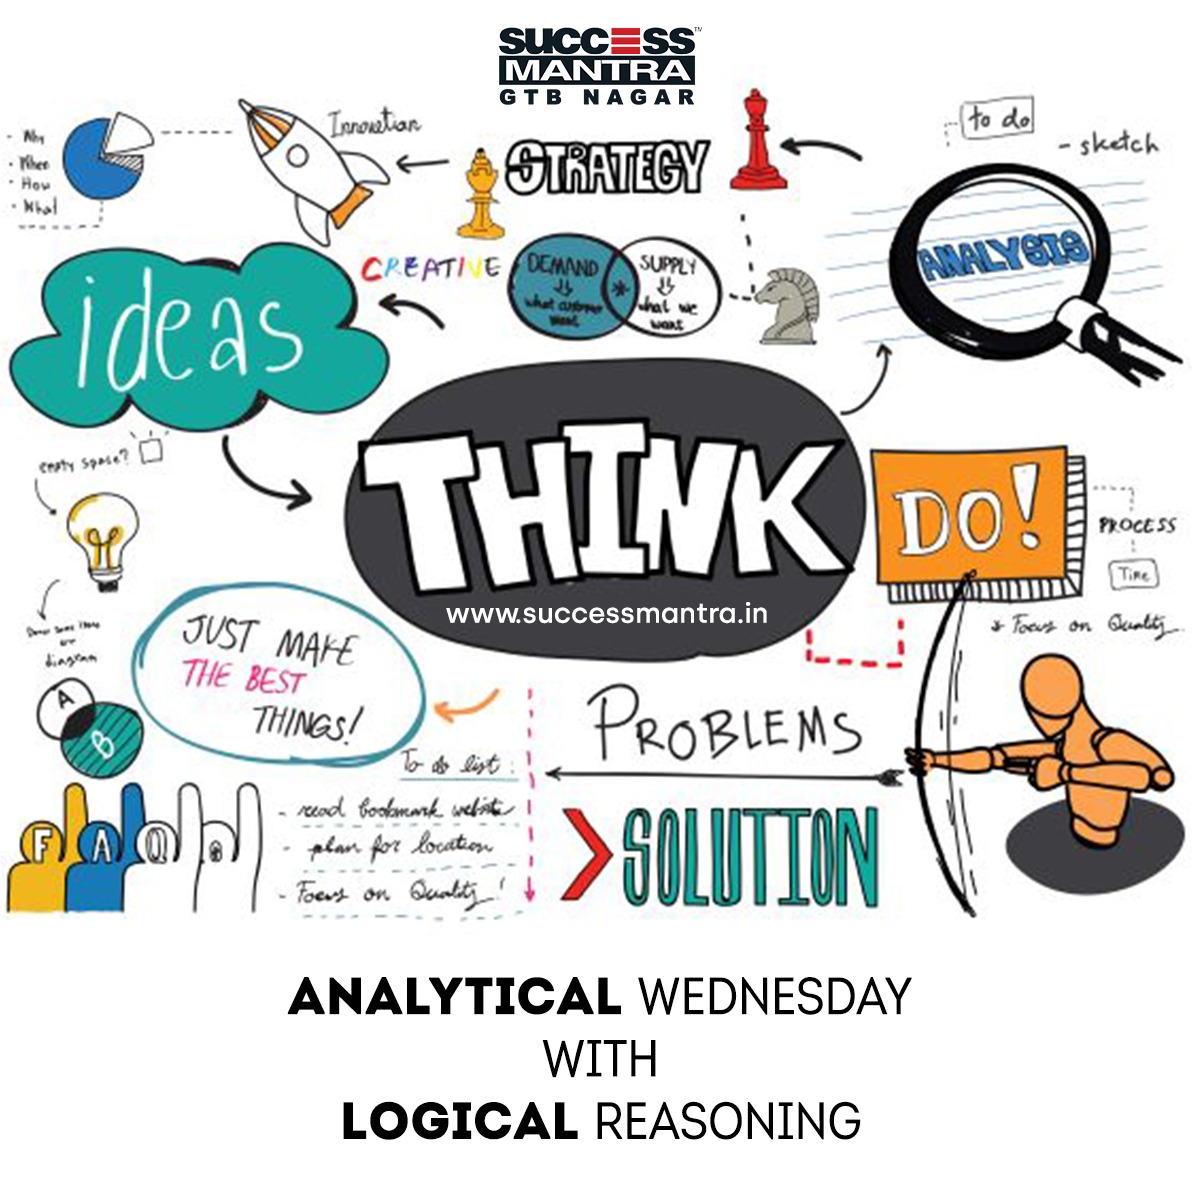 Questions on Logical Reasoning SMLRQ011